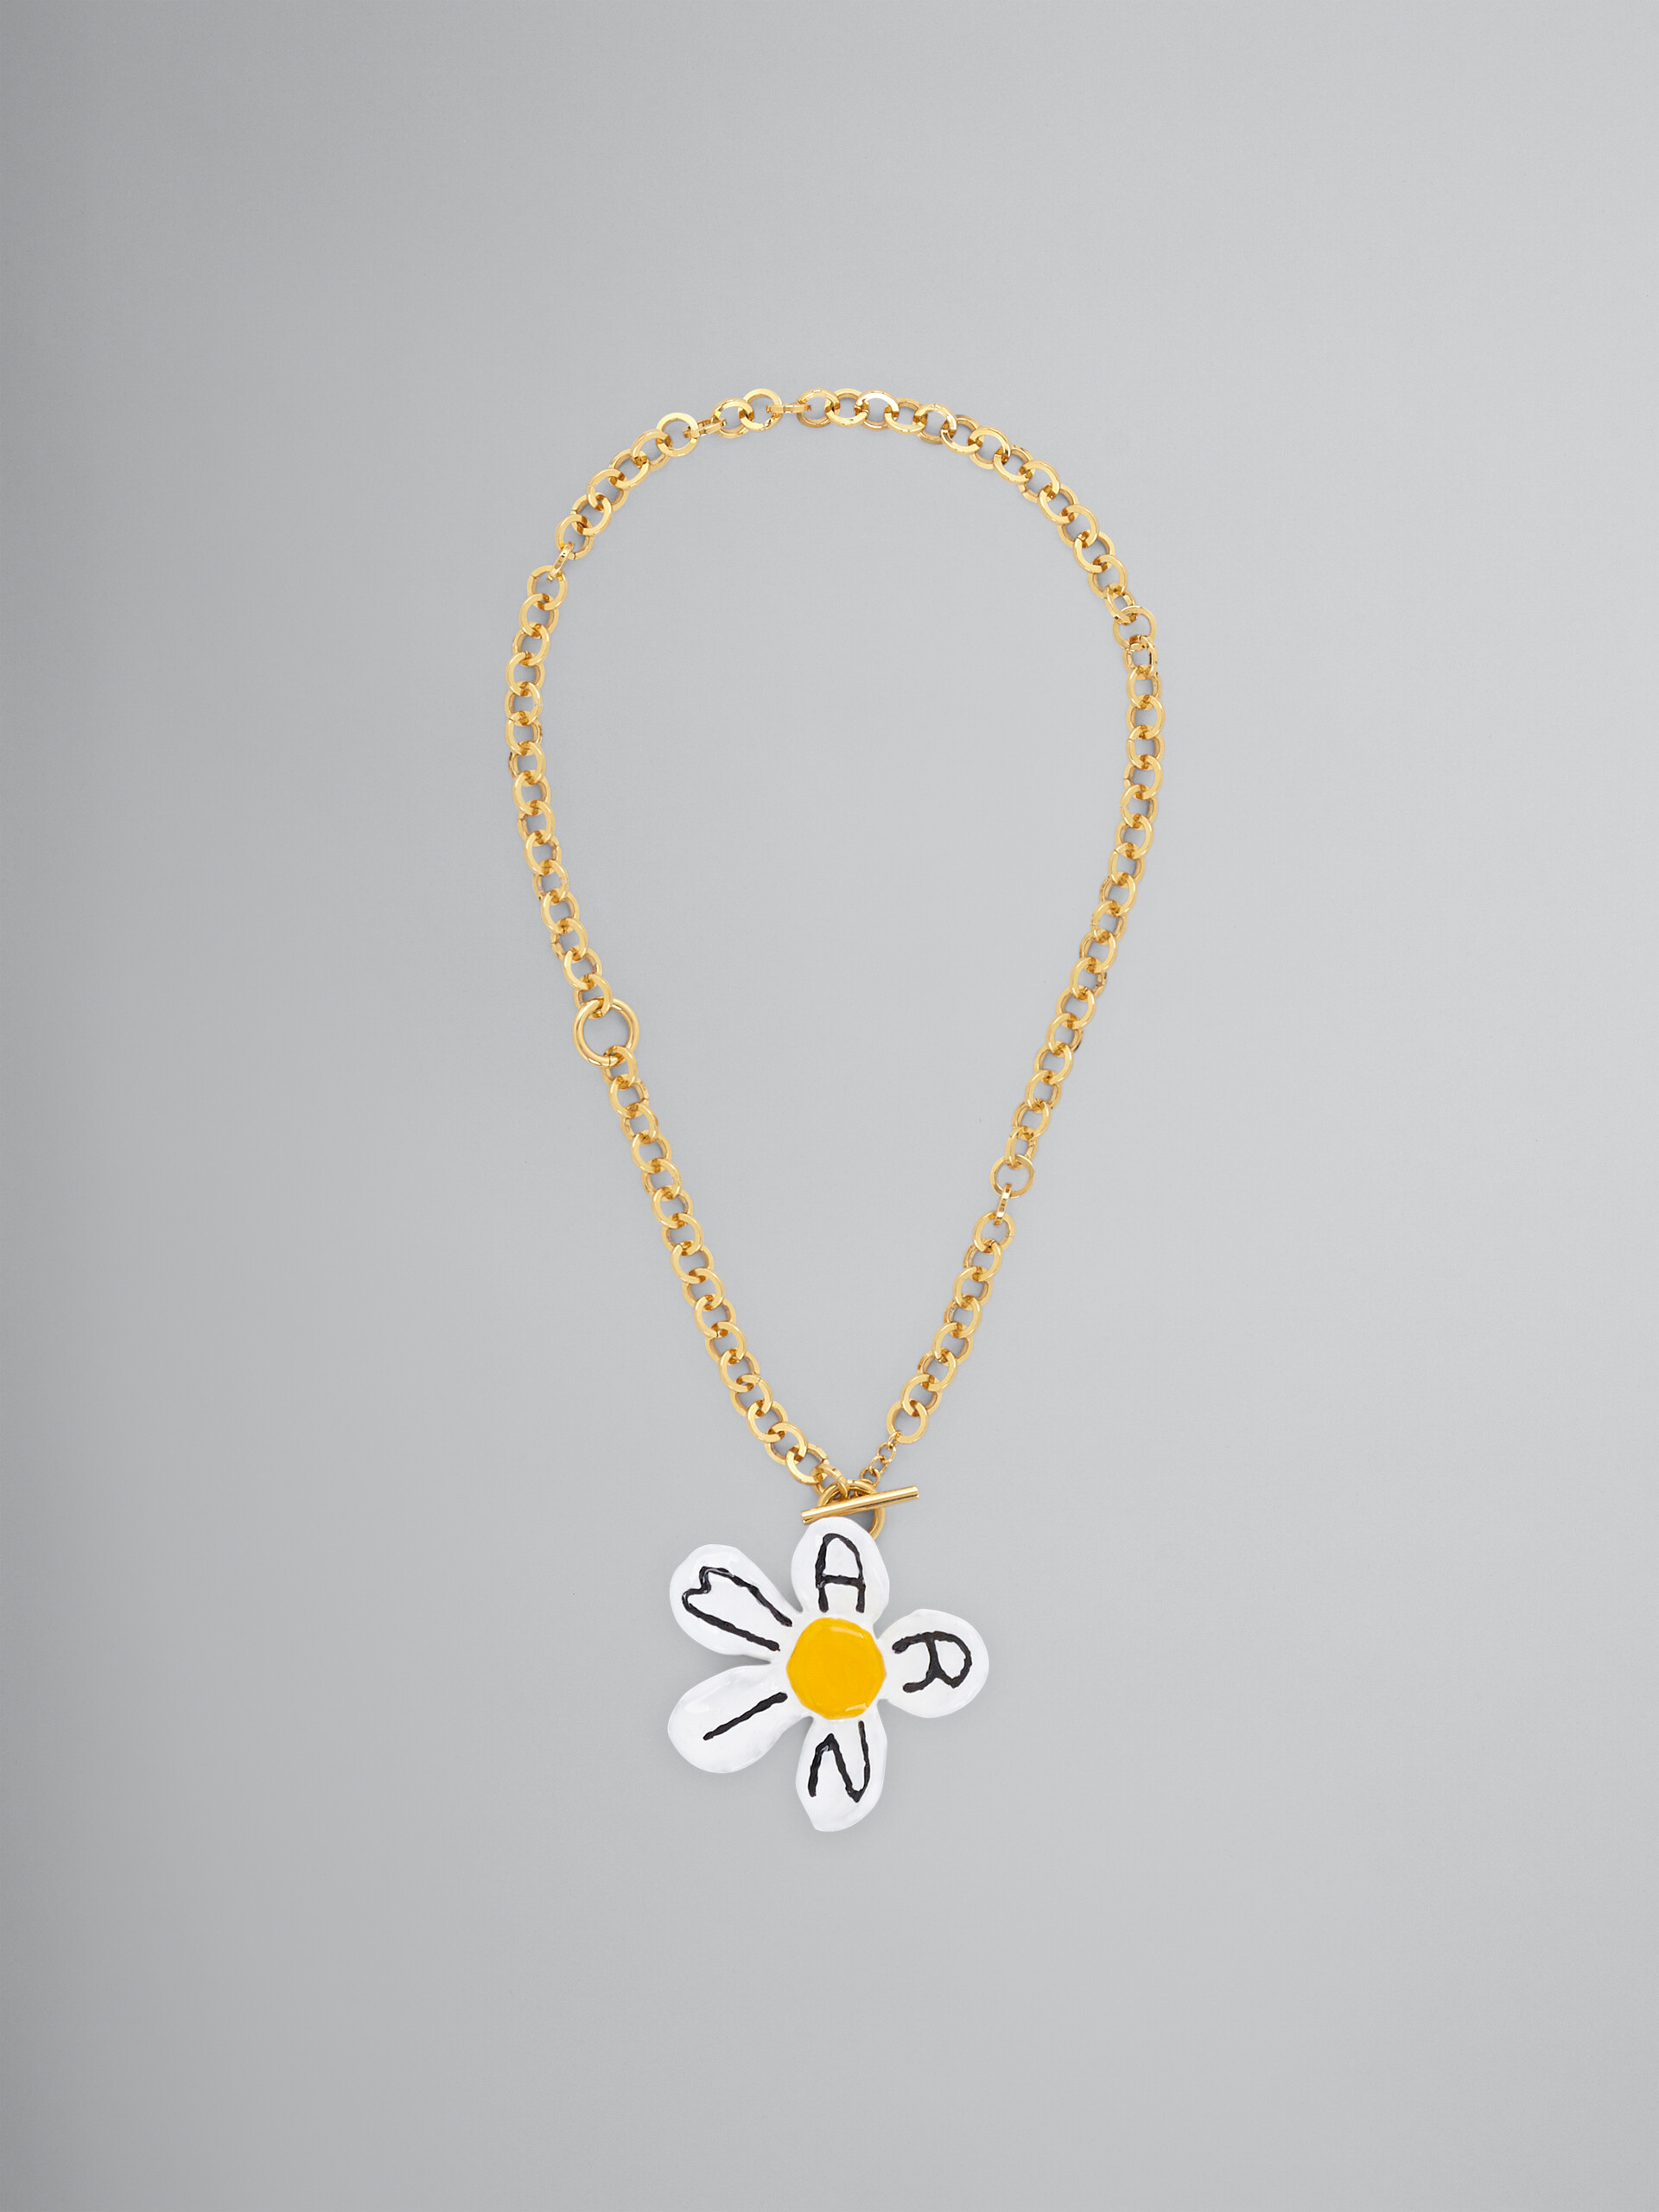 DAISY necklace - Necklaces - Image 1